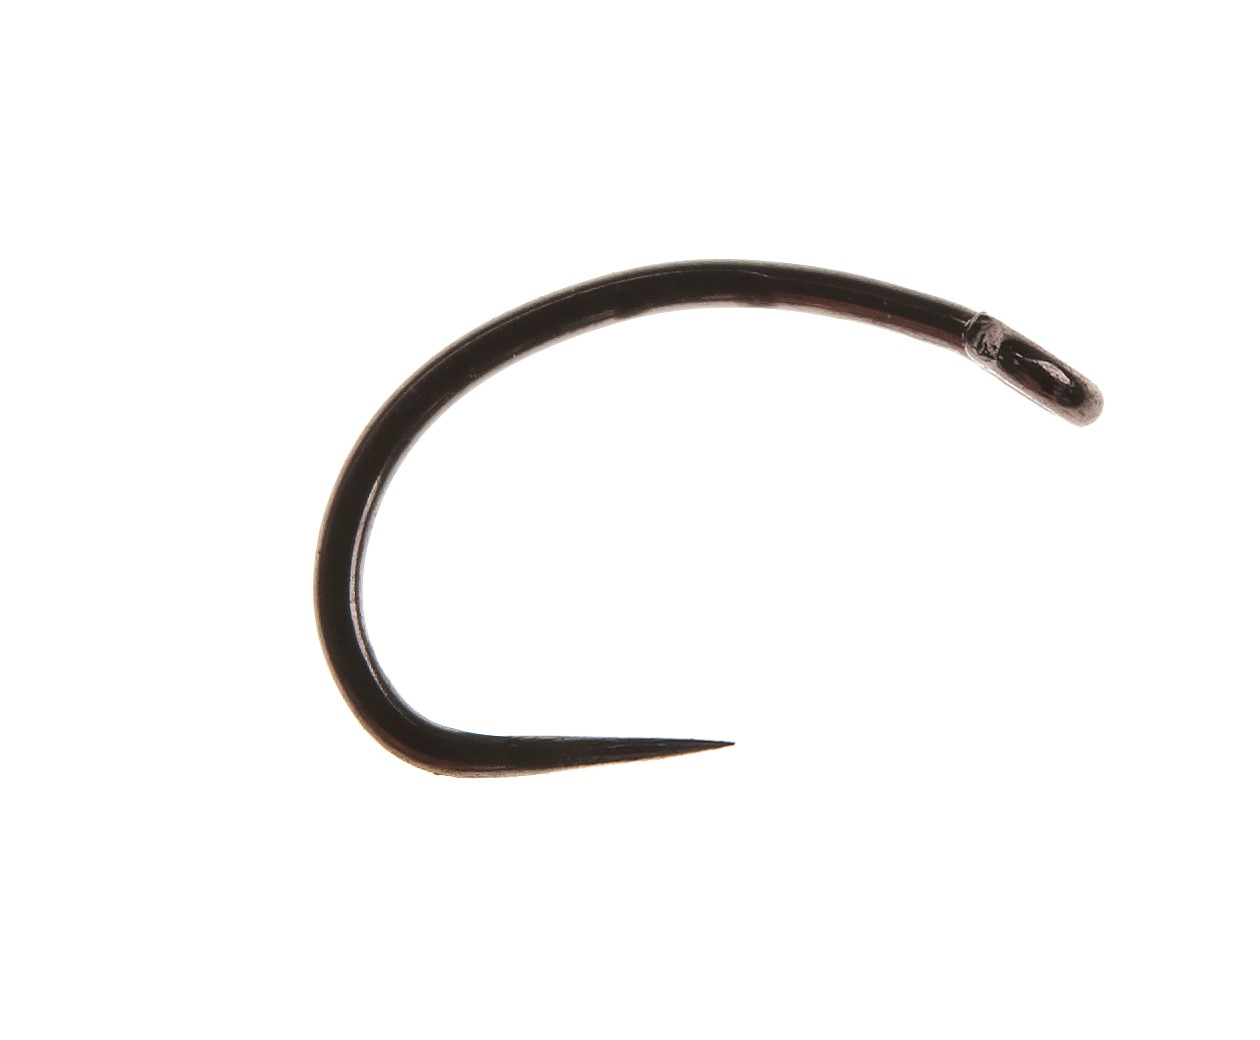 Ahrex FW525 Barbless Super Dry Hooks 18